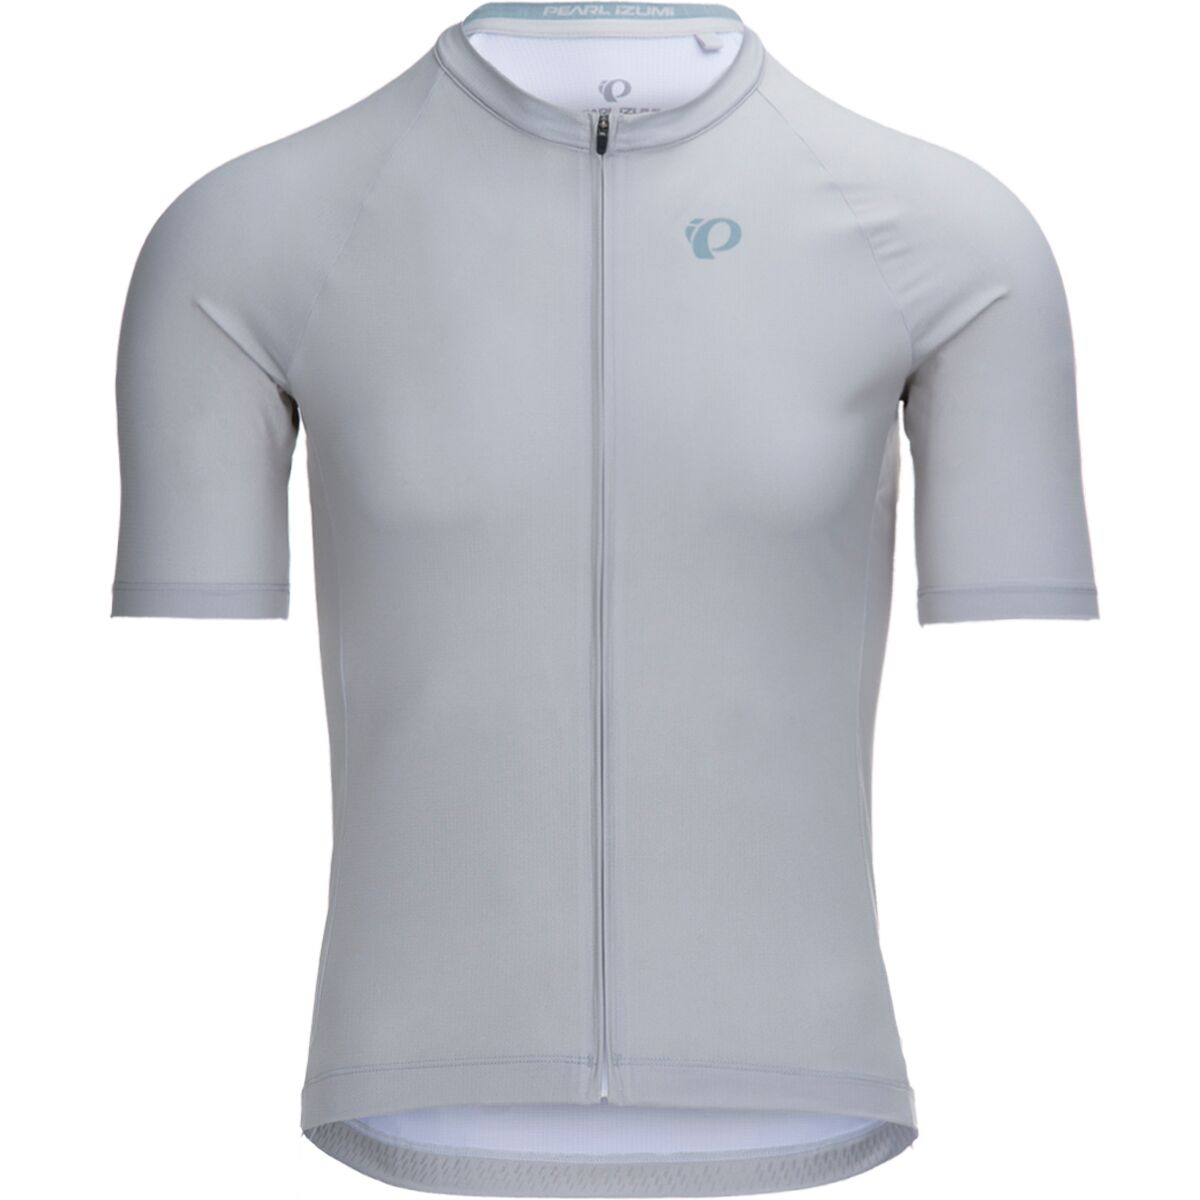 PEARL iZUMi Interval Limited Edition Jersey - Men's